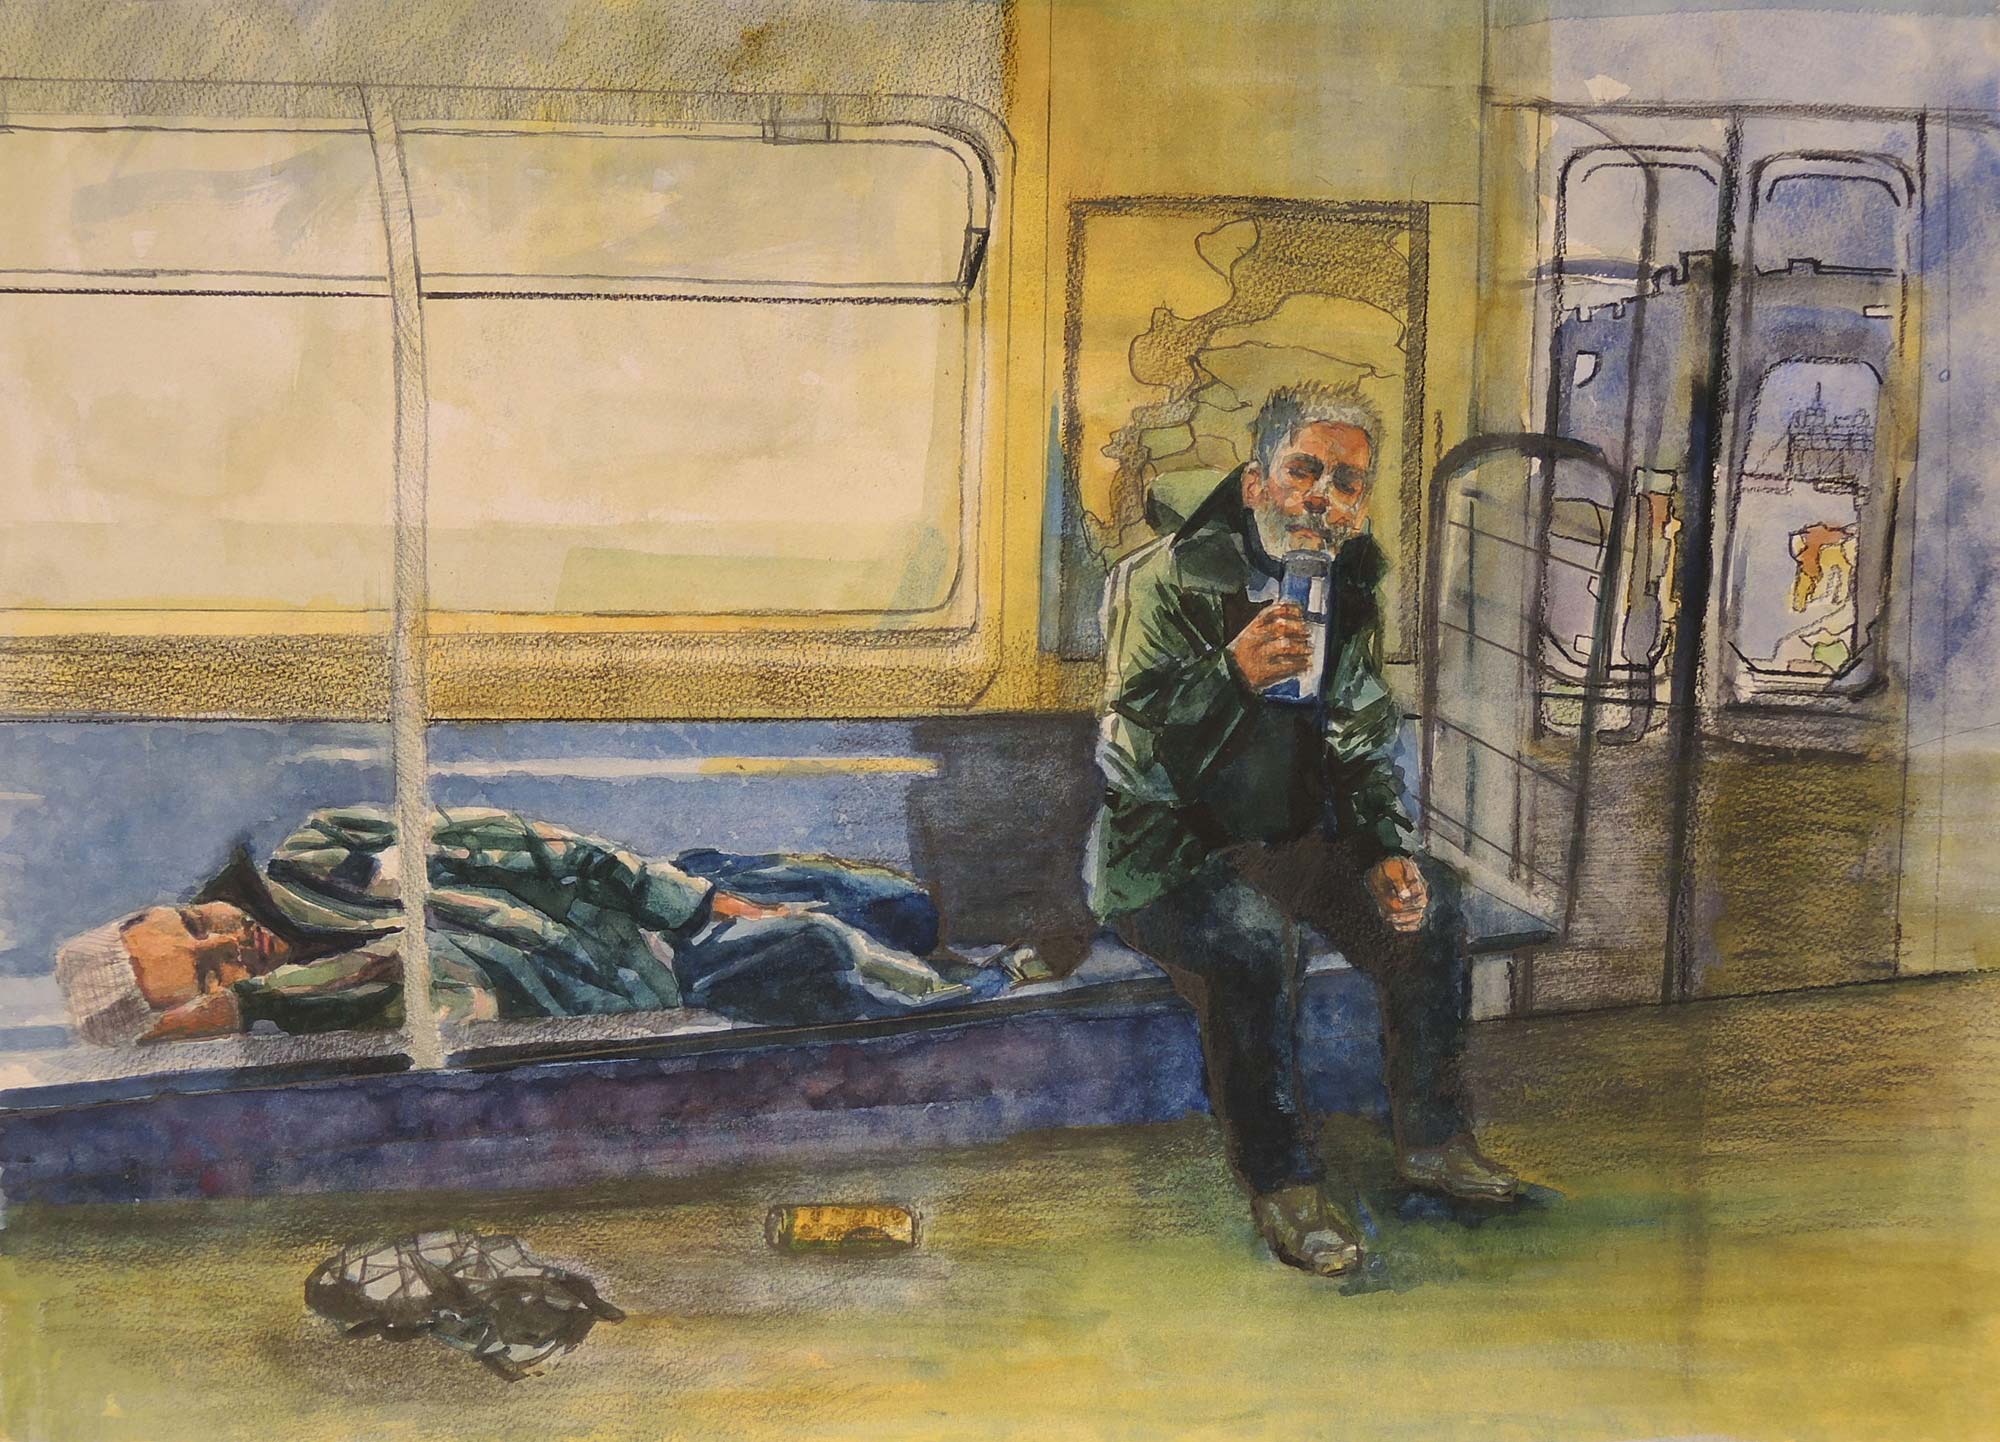 A painting by Robert Gomez of two people on a subway